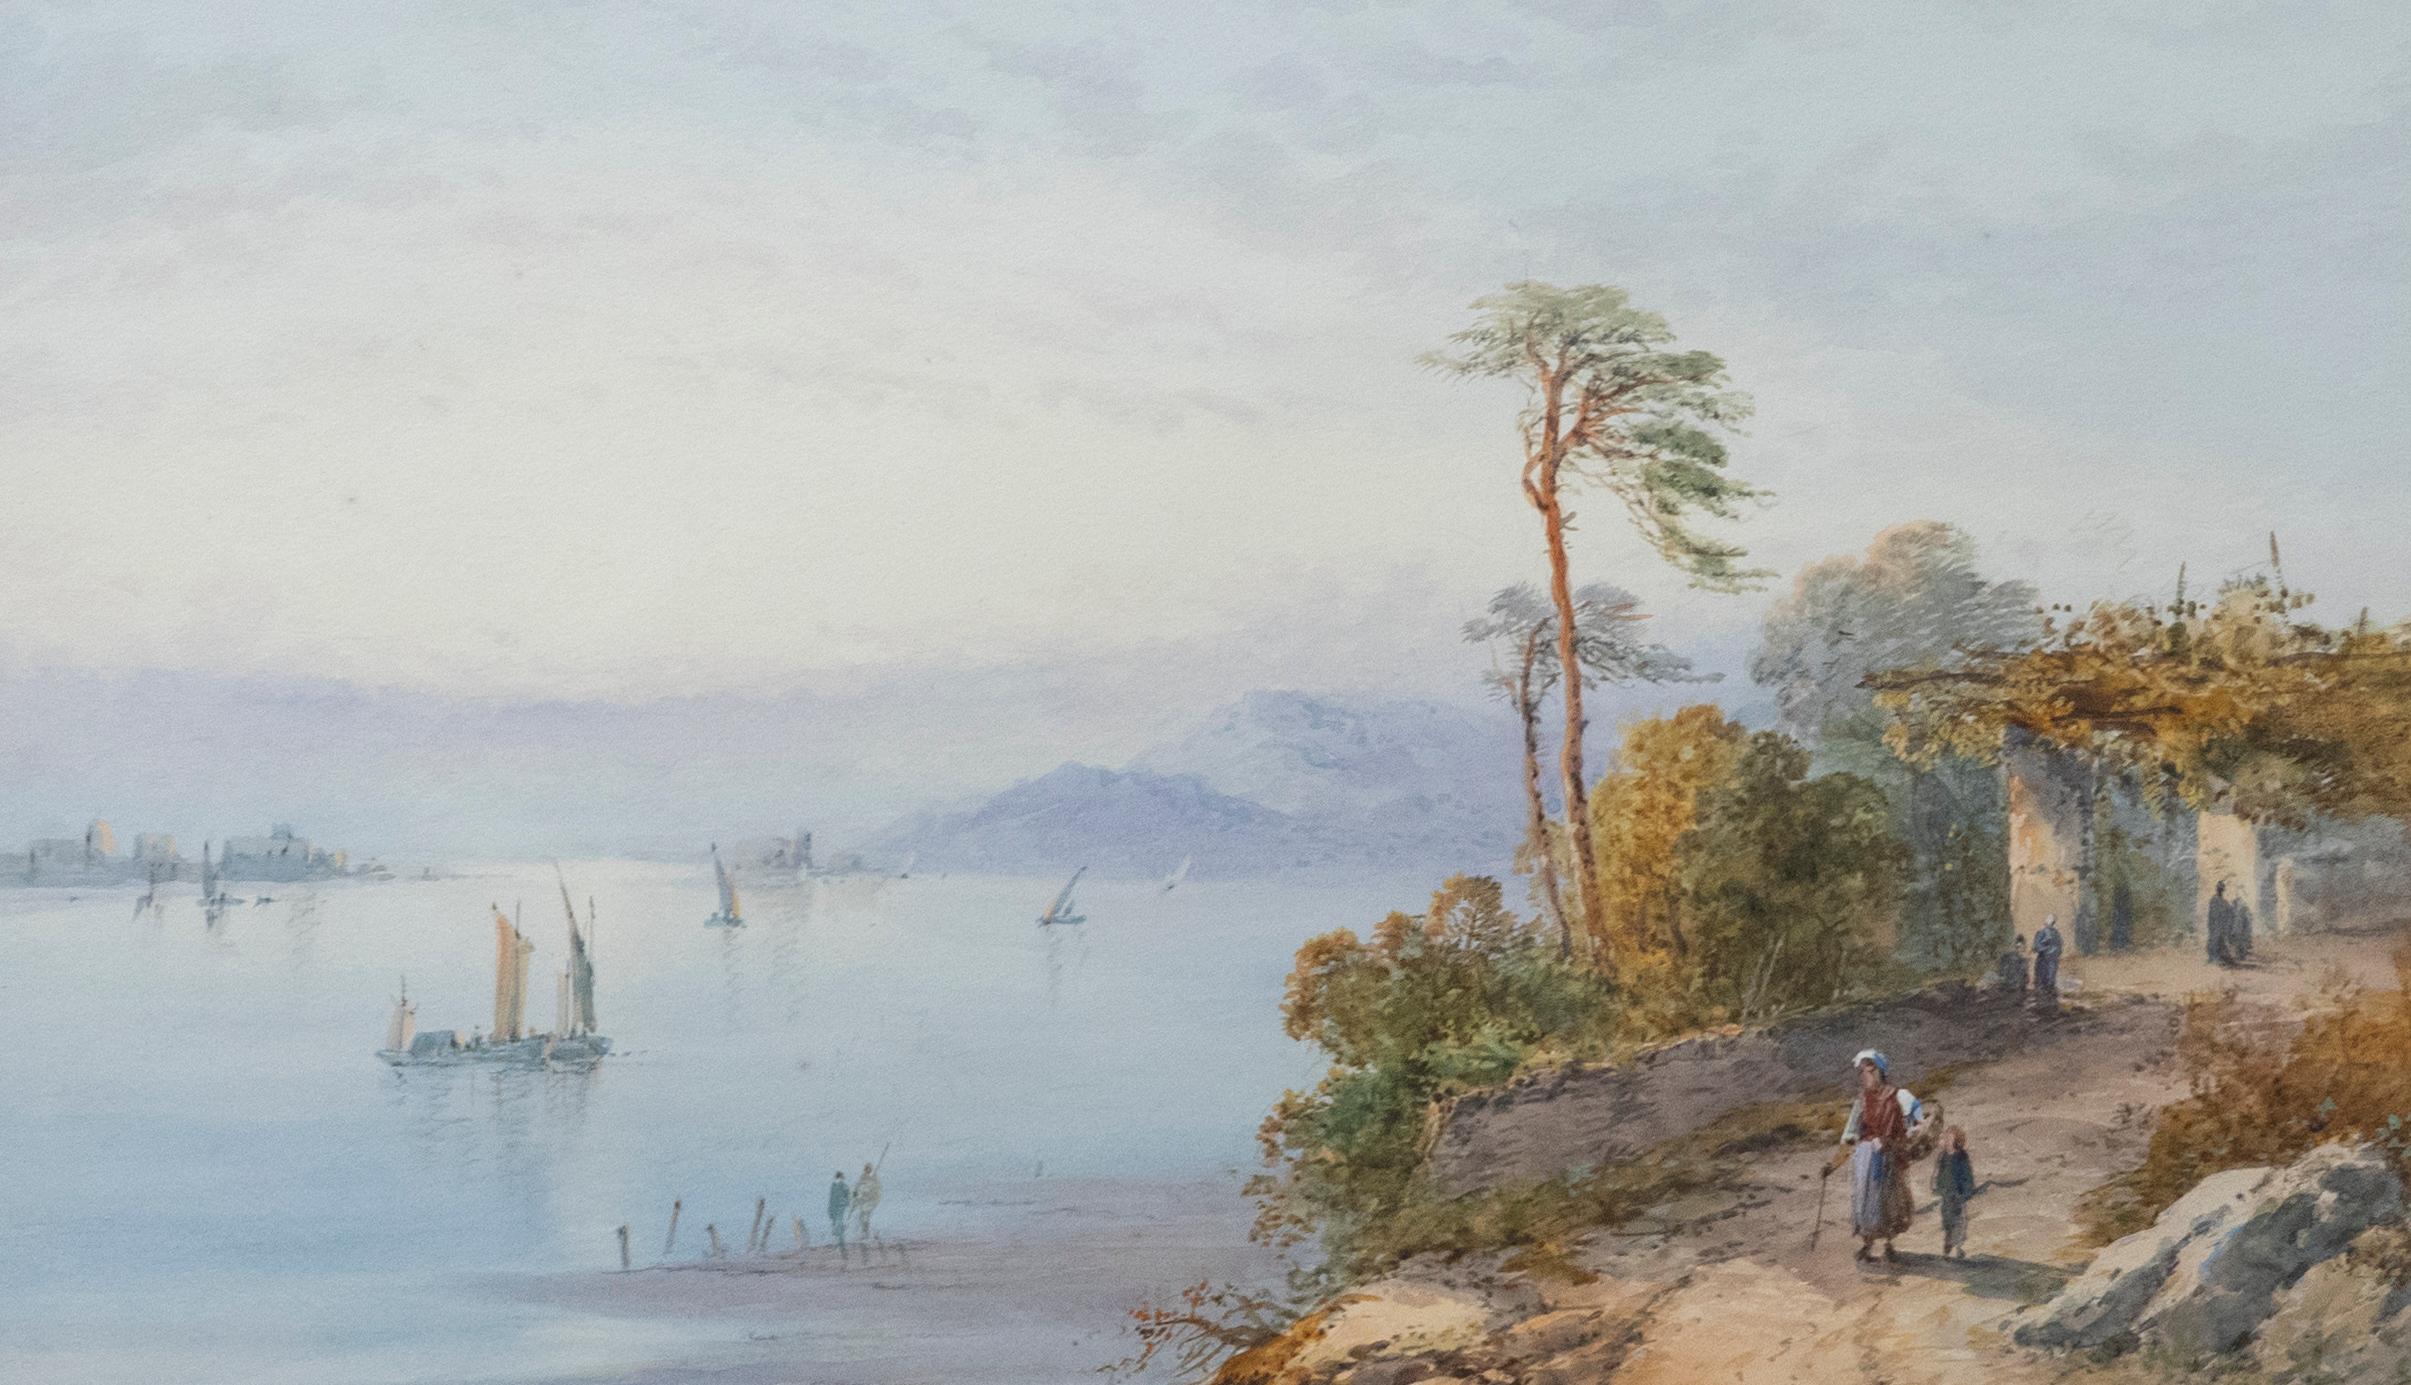 A fine late 19th/early 20th century watercolour scene by Frank Catano (fl.1880-1920). The scene depicts a picturesque Italian bay with figures walking the coastal path. The artist has signed the composition to the lower right and the watercolour has